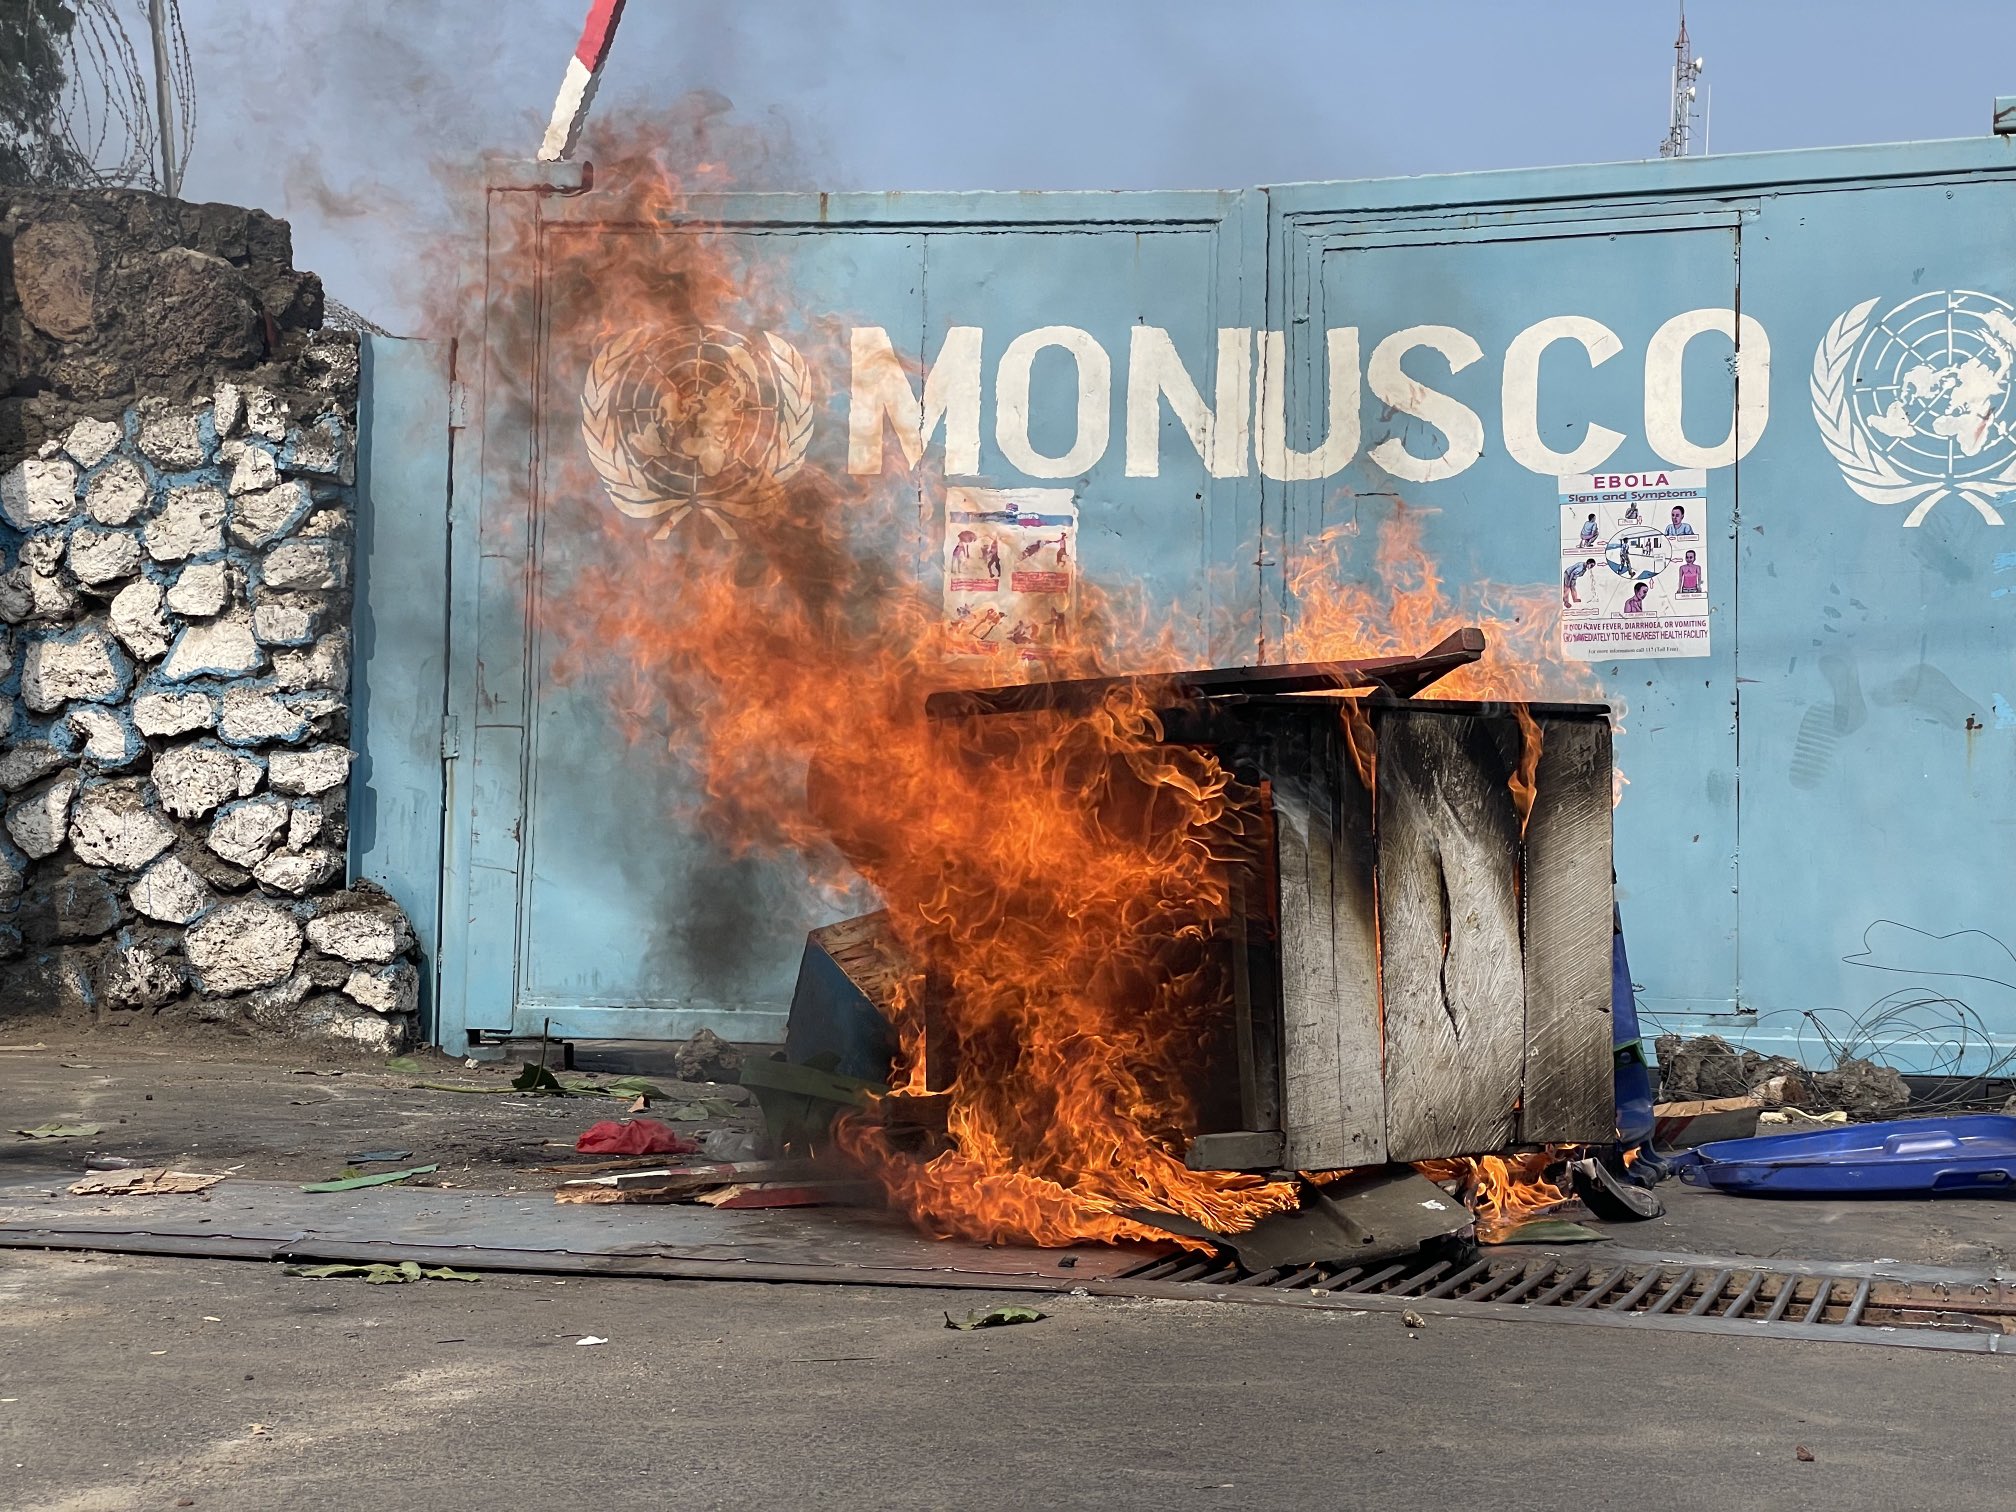 Hundreds of protesters attacked the offices of United Nations peacekeeping mission MONUSCO in Goma on Monday, demanding the withdrawal of the mission from the DRC.